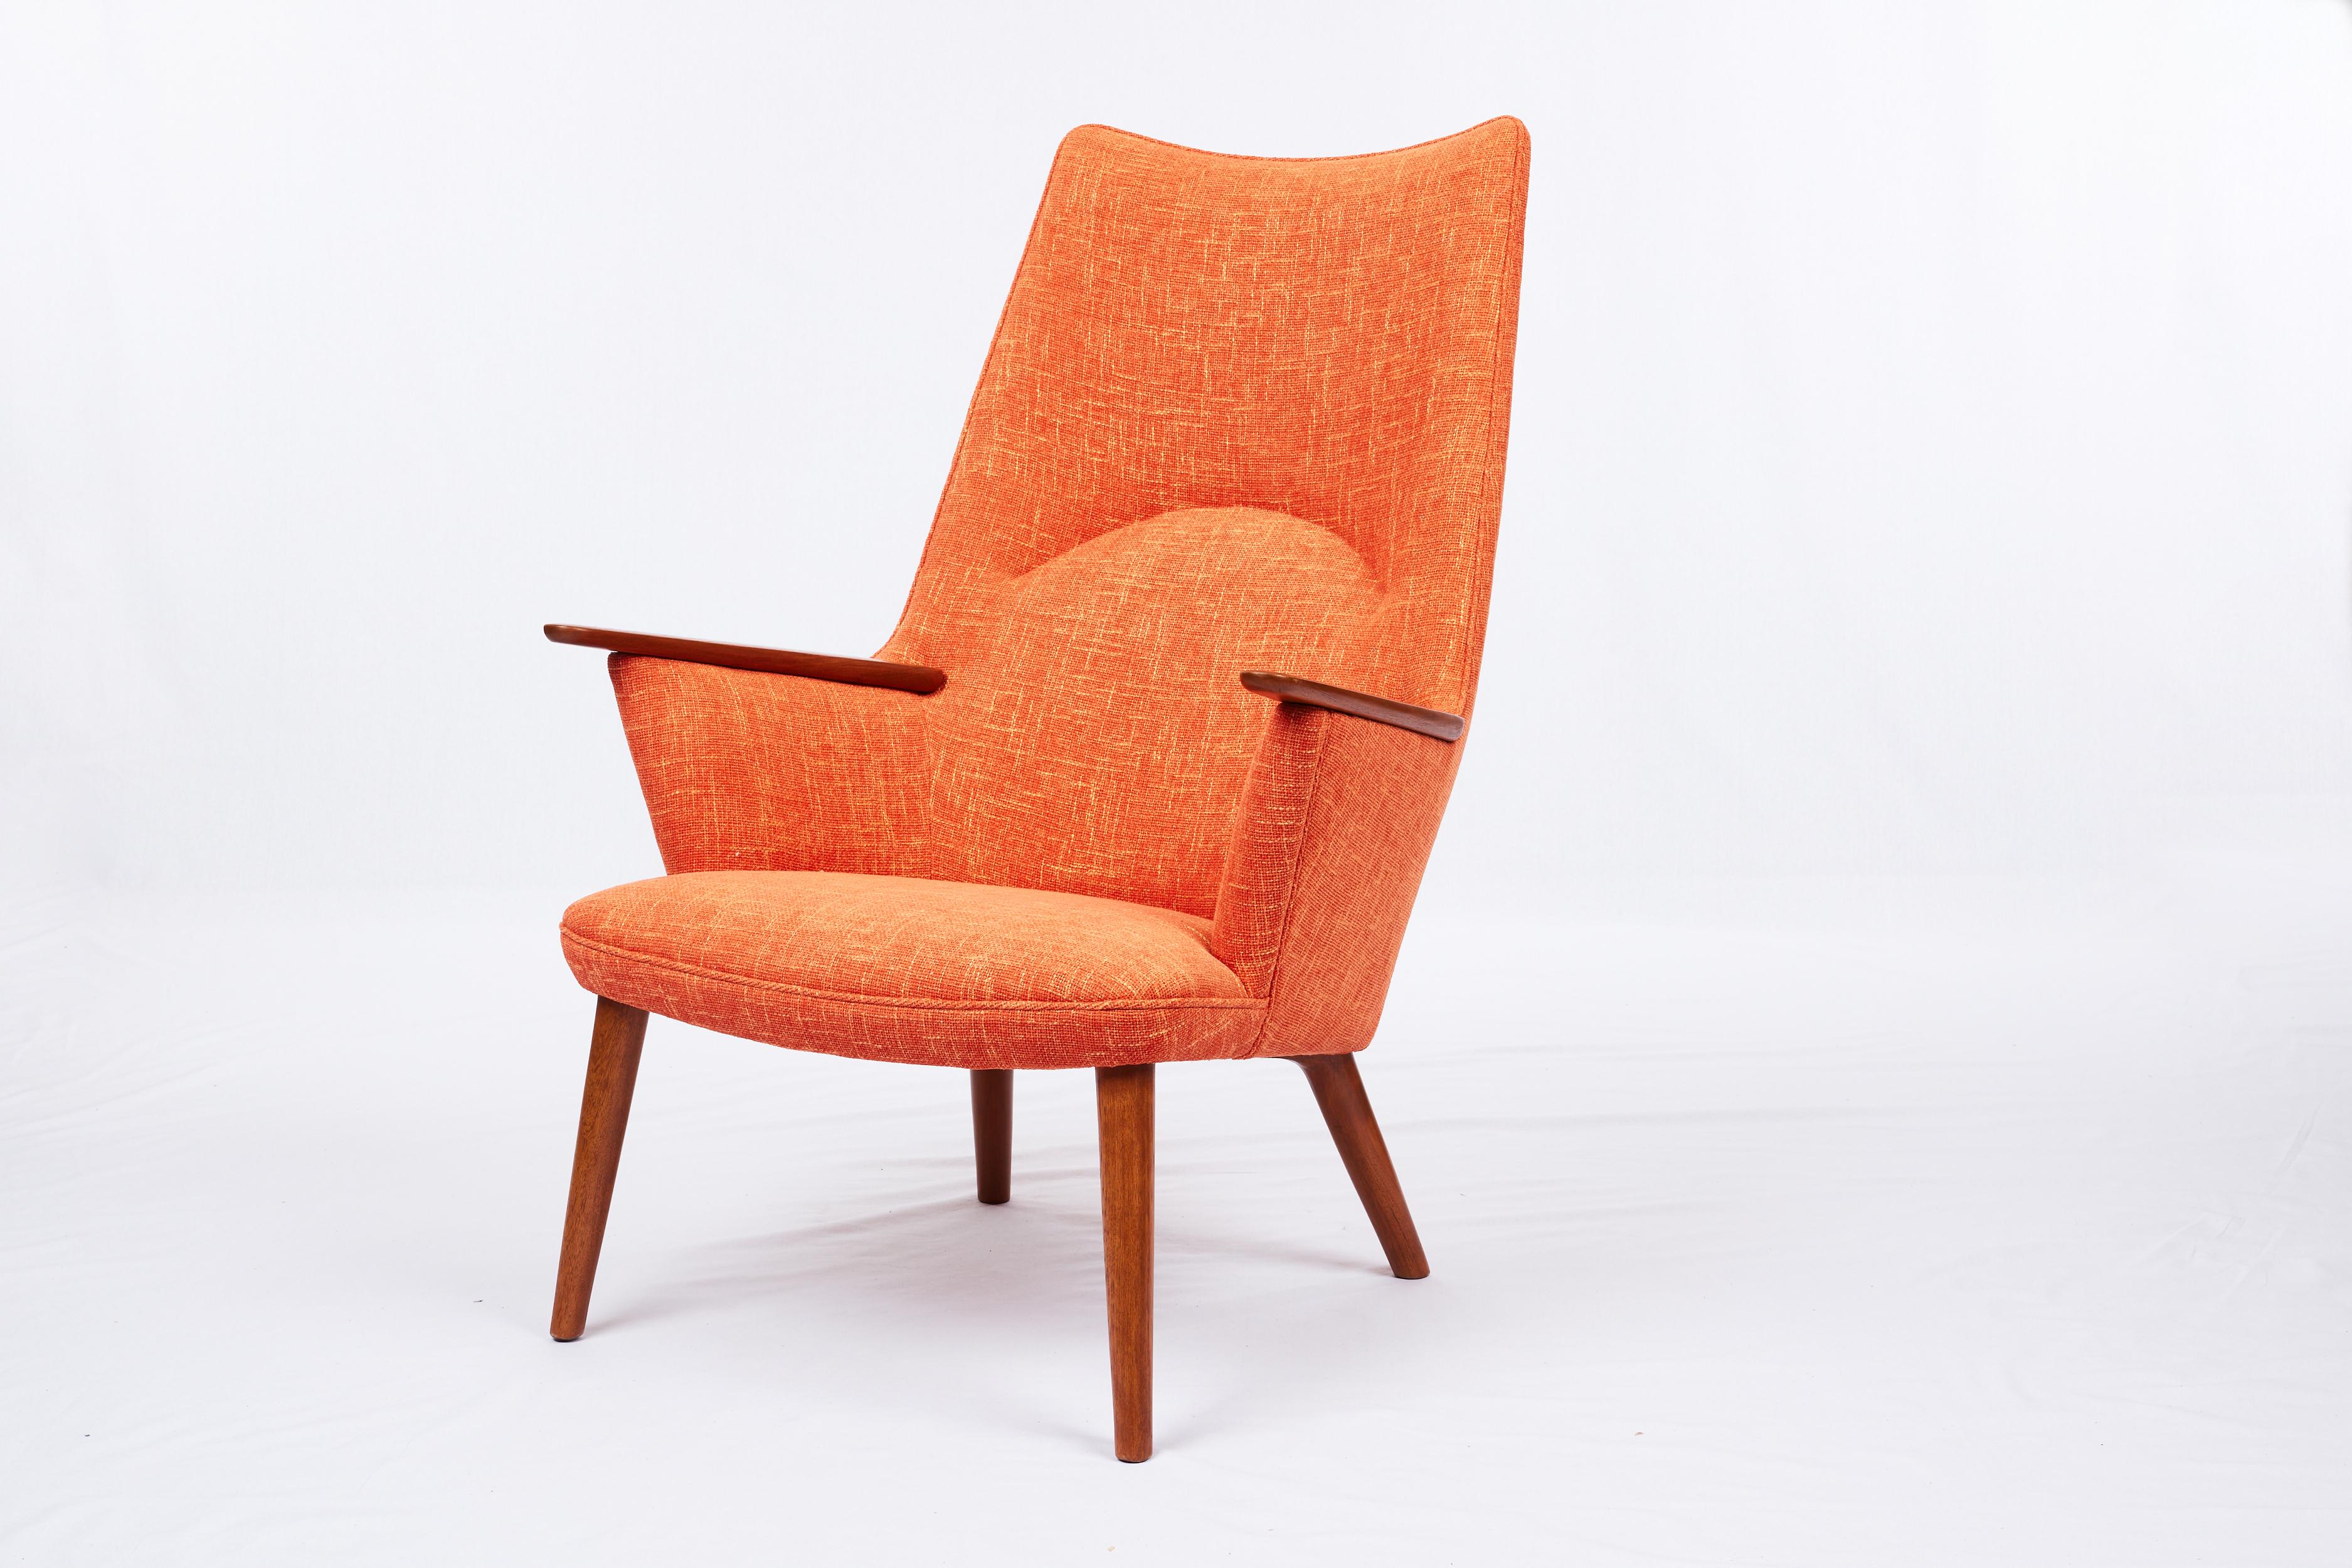 Hans Wegner AP-27 lounge chair. Designer in 1954. Produced by A.P. Stolen.